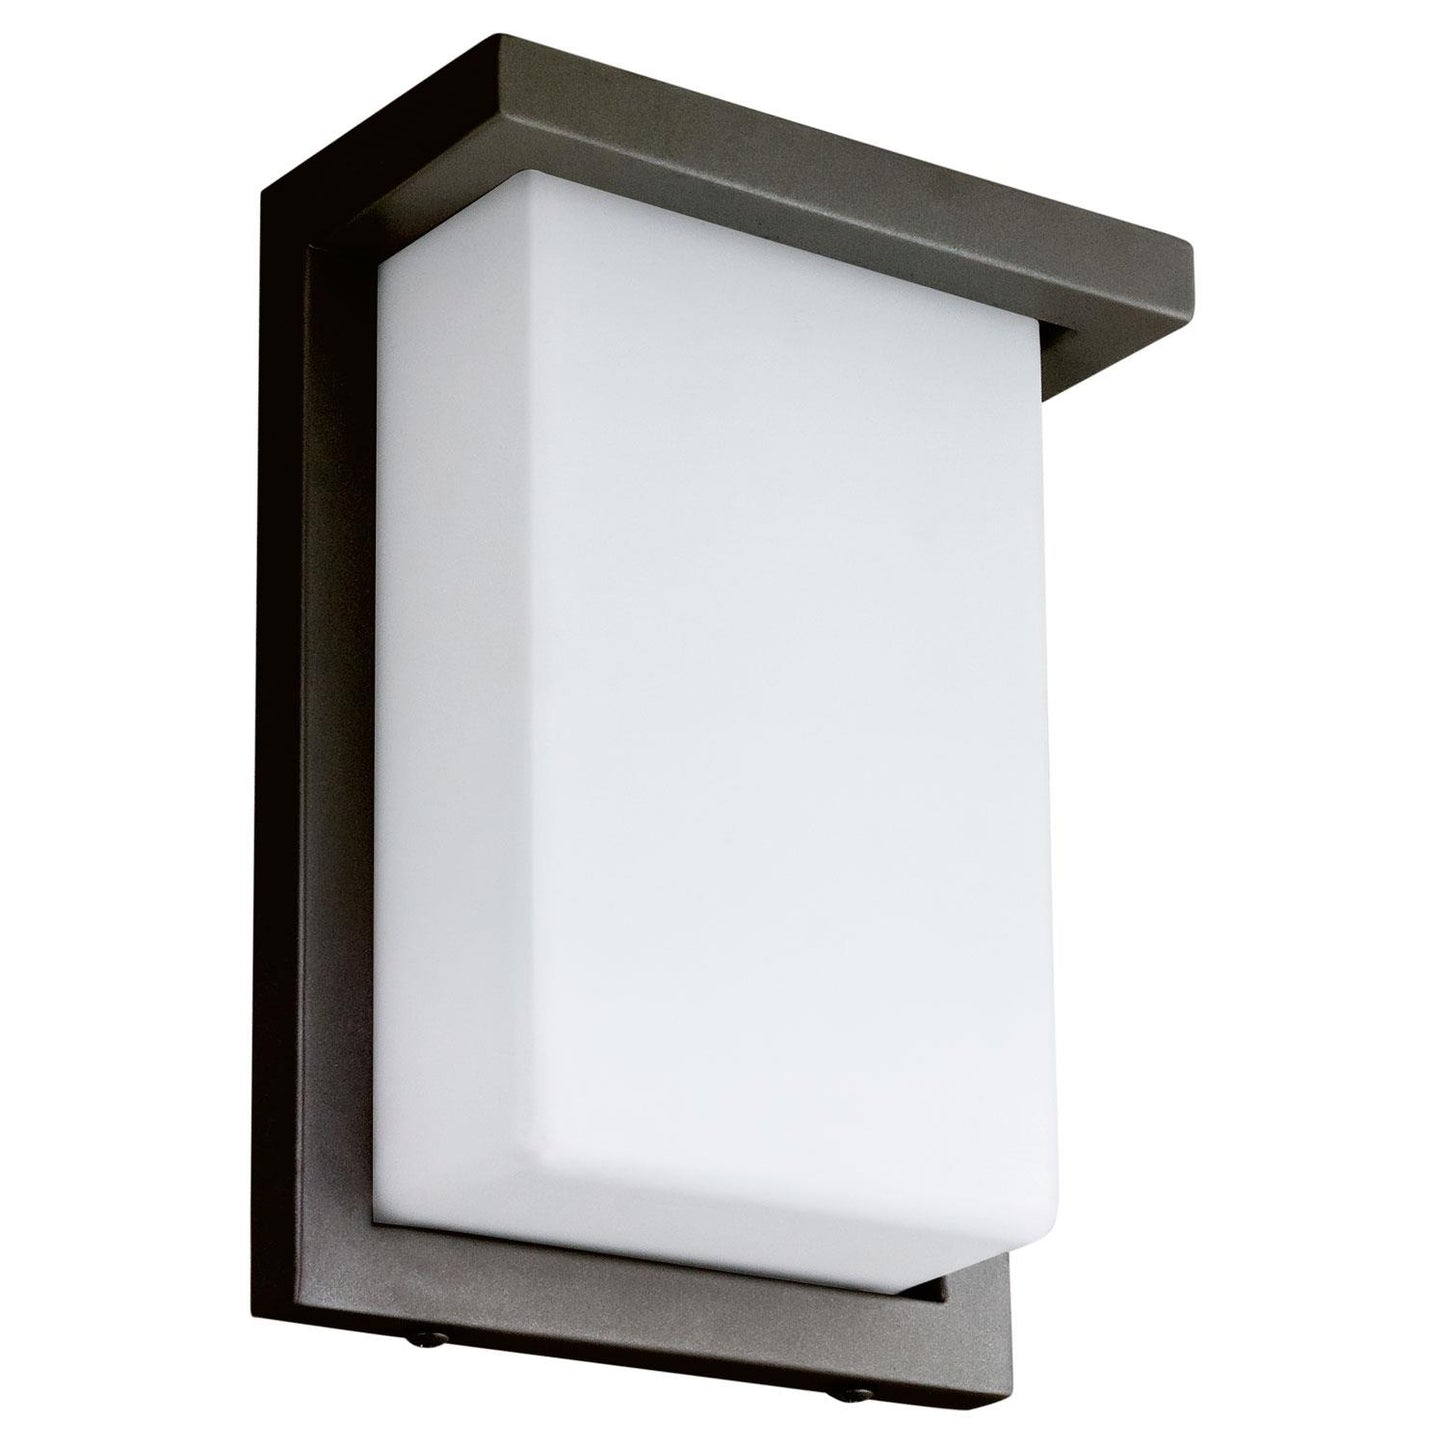 Sunlite 81075-SU LED 8" Modern Wall Sconce Light Fixture, 12 Watts (60W Equivalent), Oil Rubbed Bronze Finish, 600 Lumens, Outdoor Use, ETL Listed, 40K - Cool White